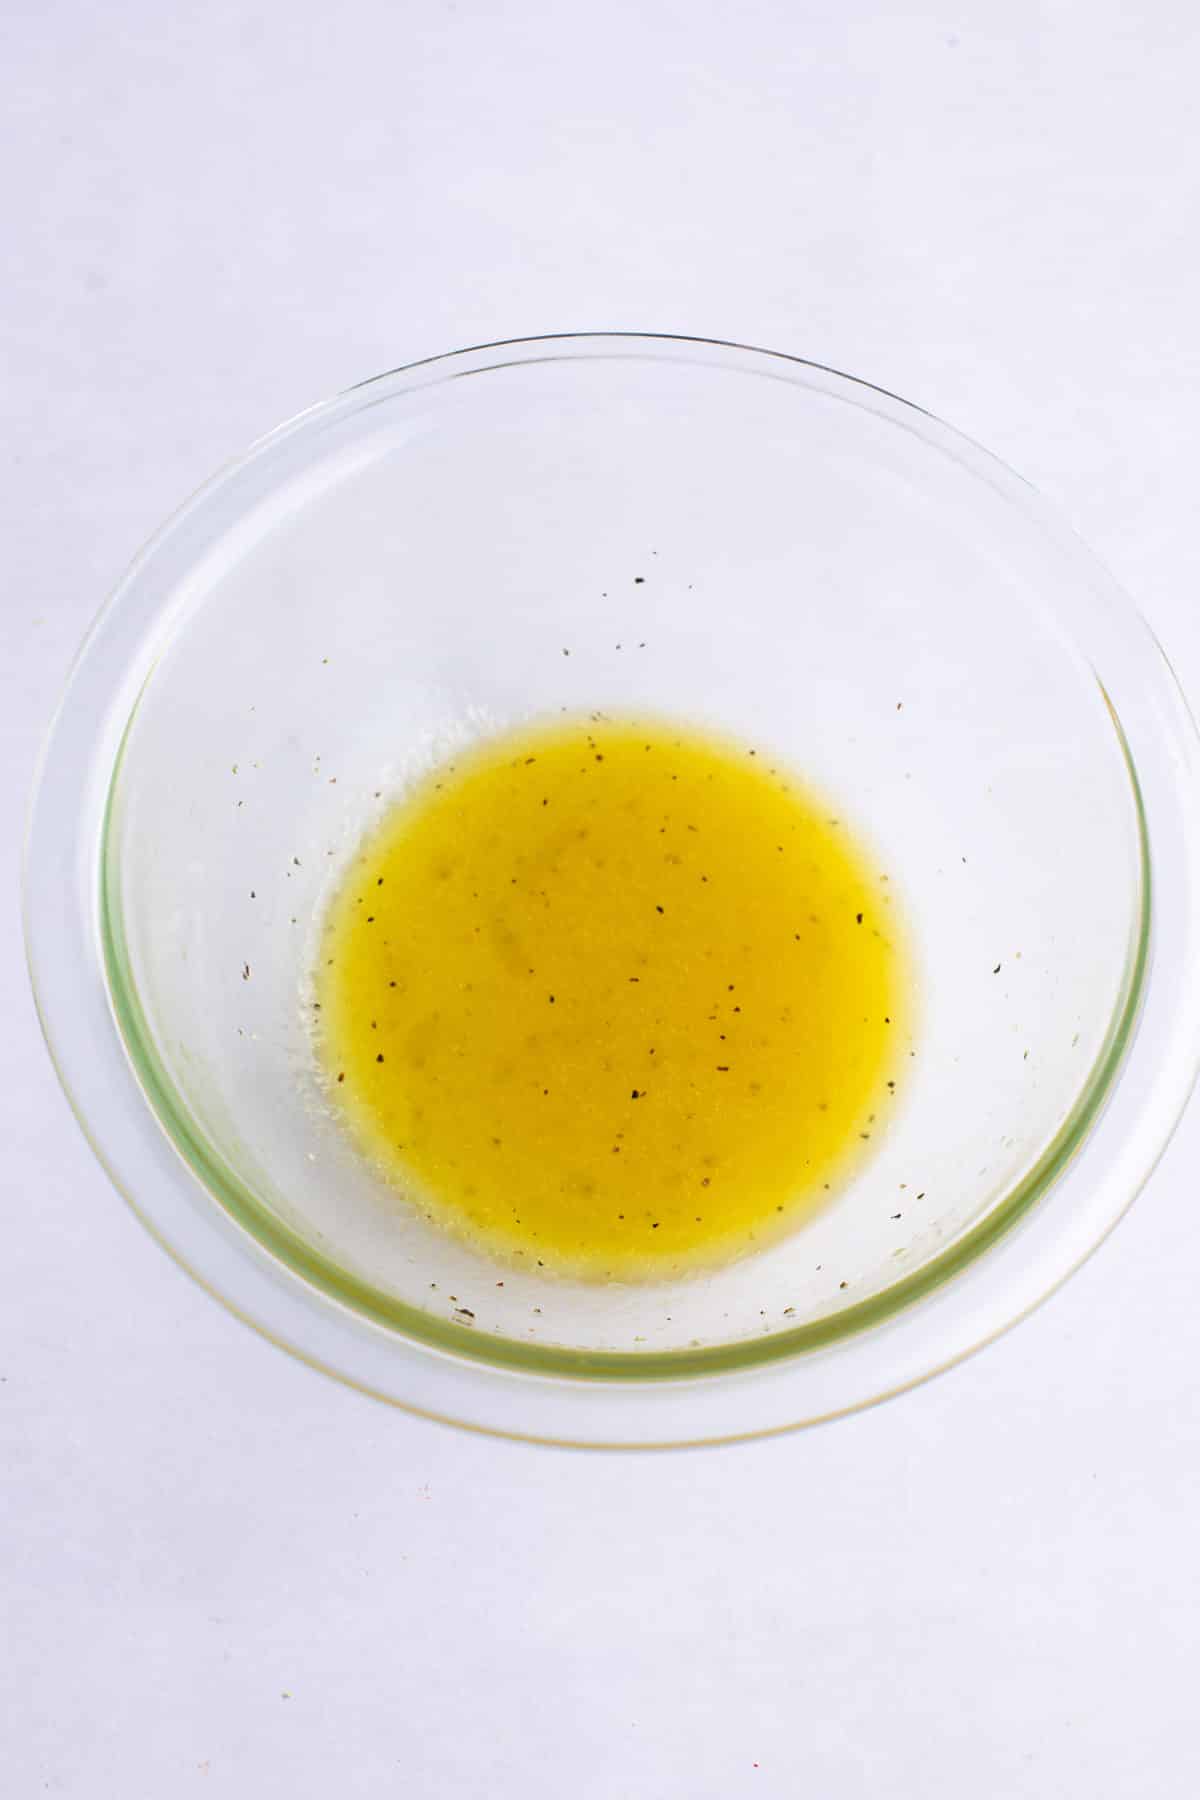 The salad dressing in a glass bowl.